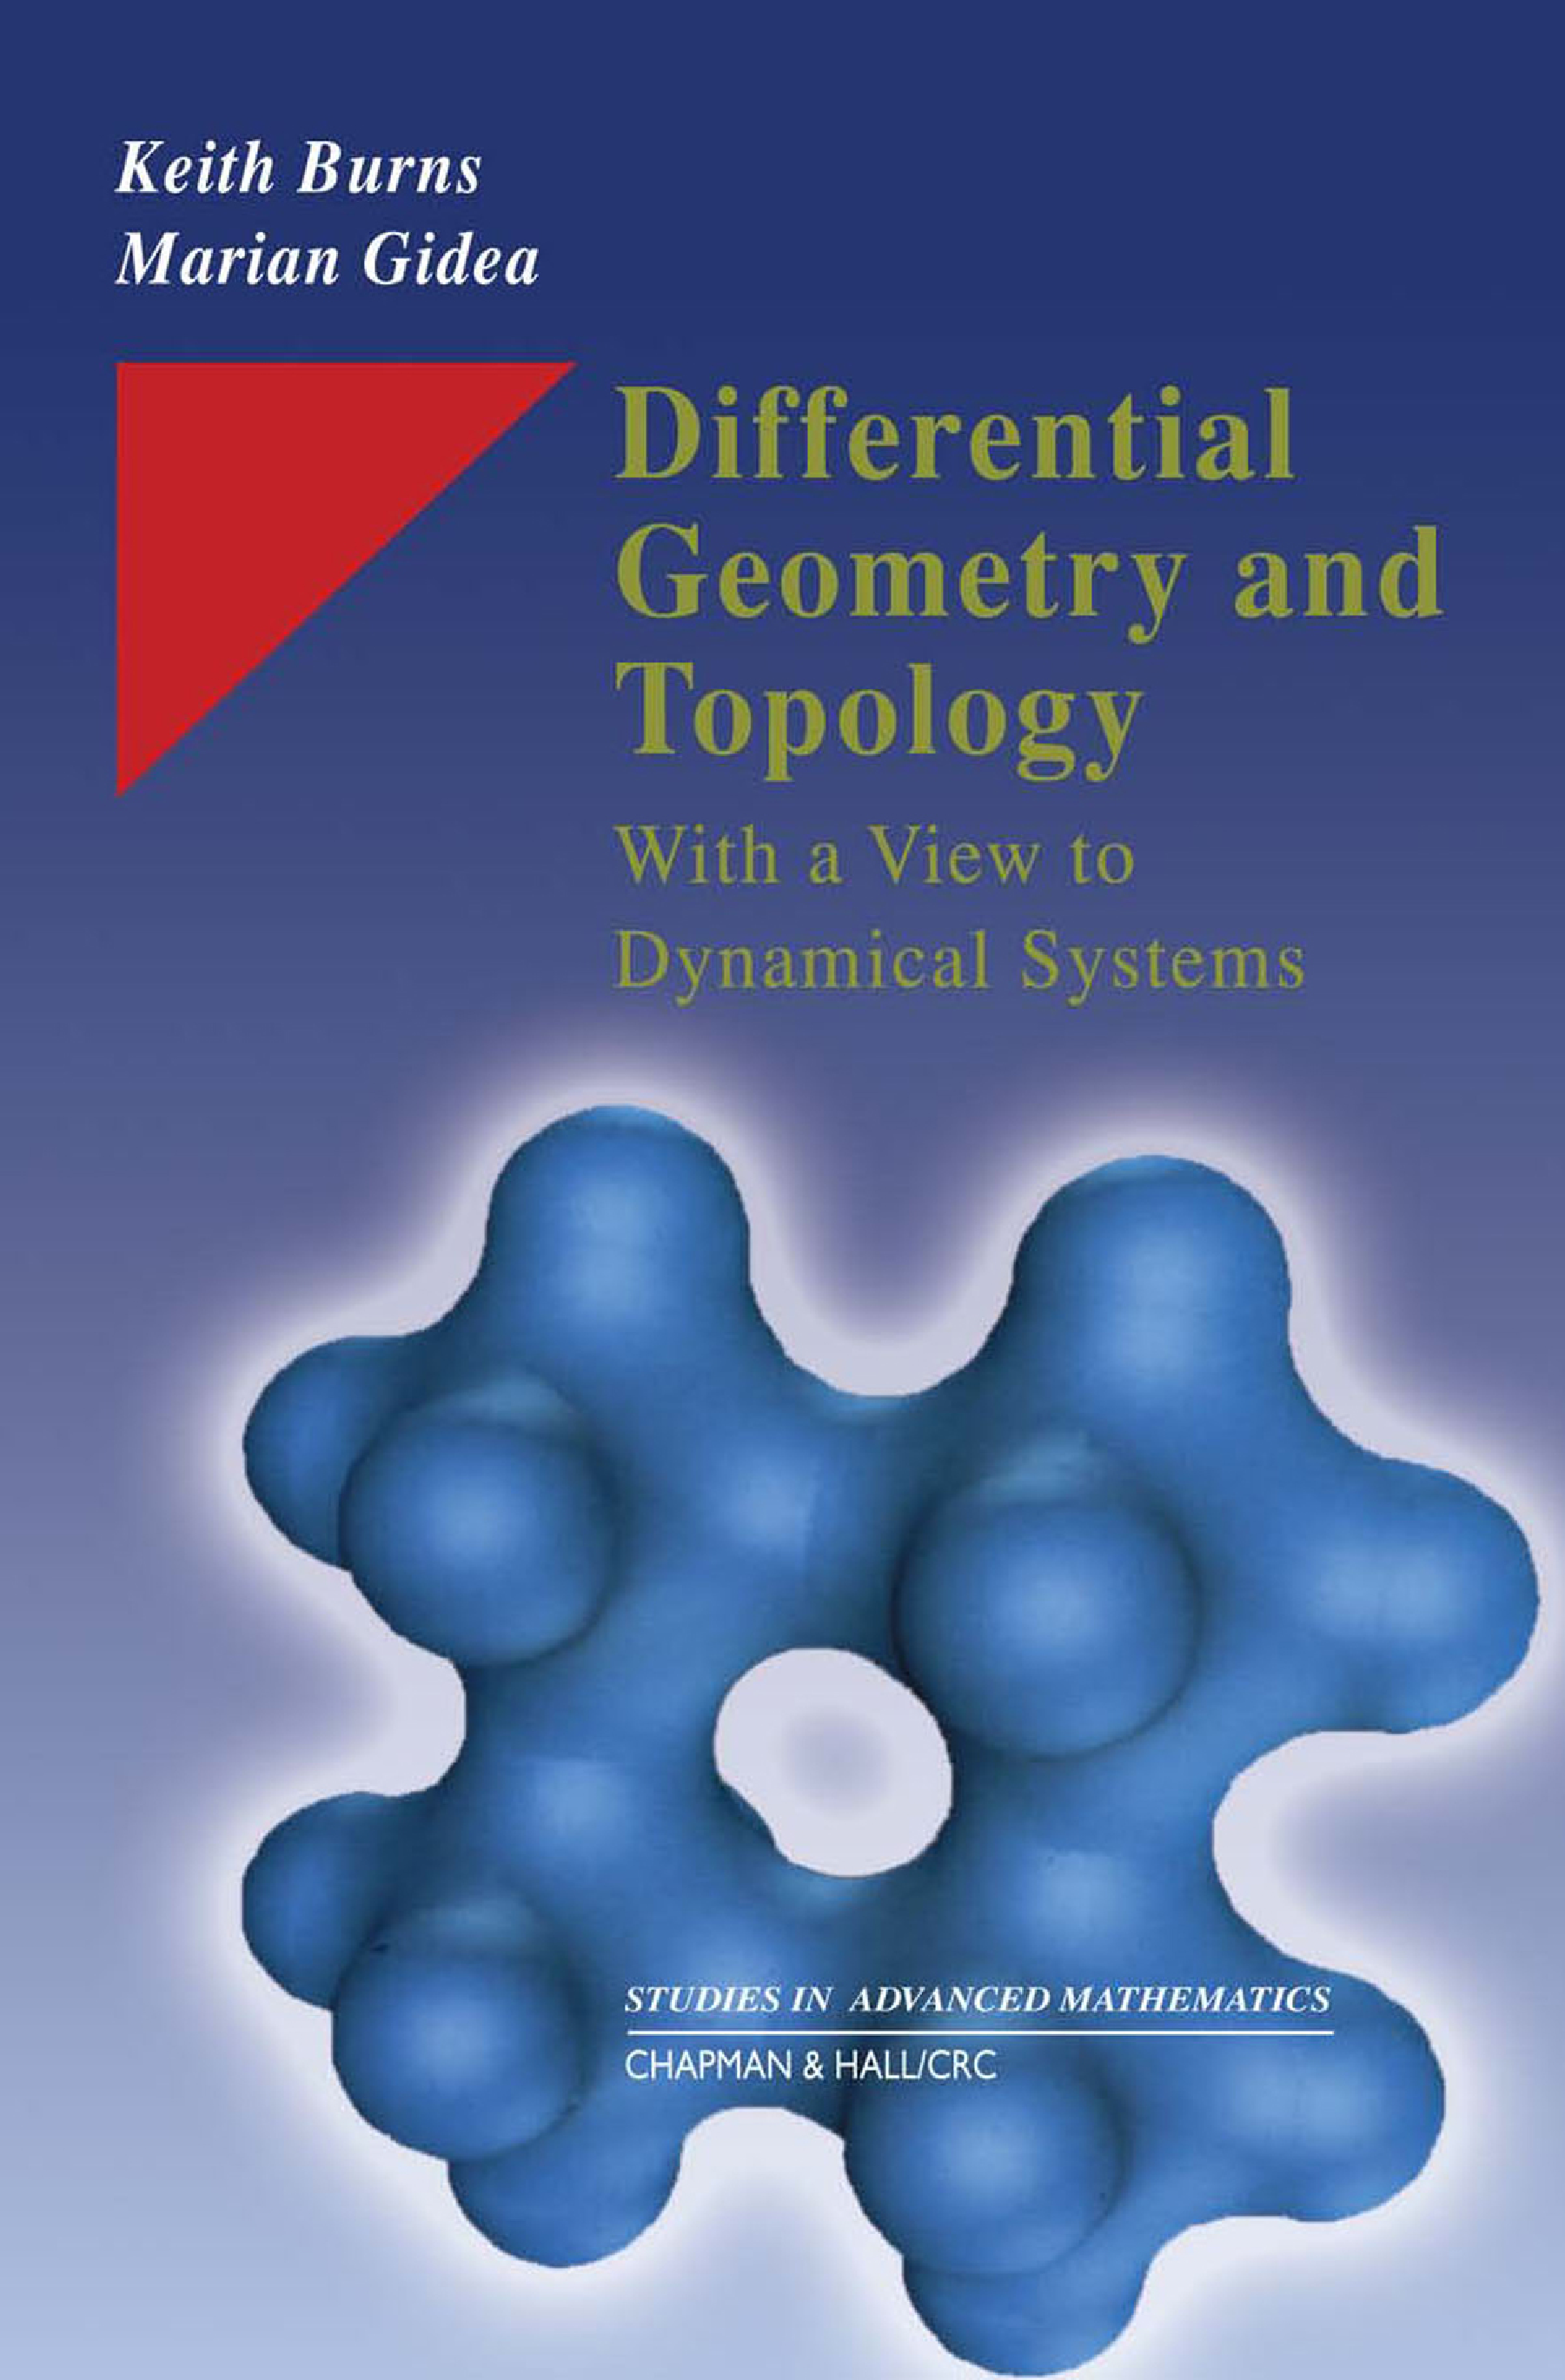 Differential geometry and topology : with a view to dynamical systems